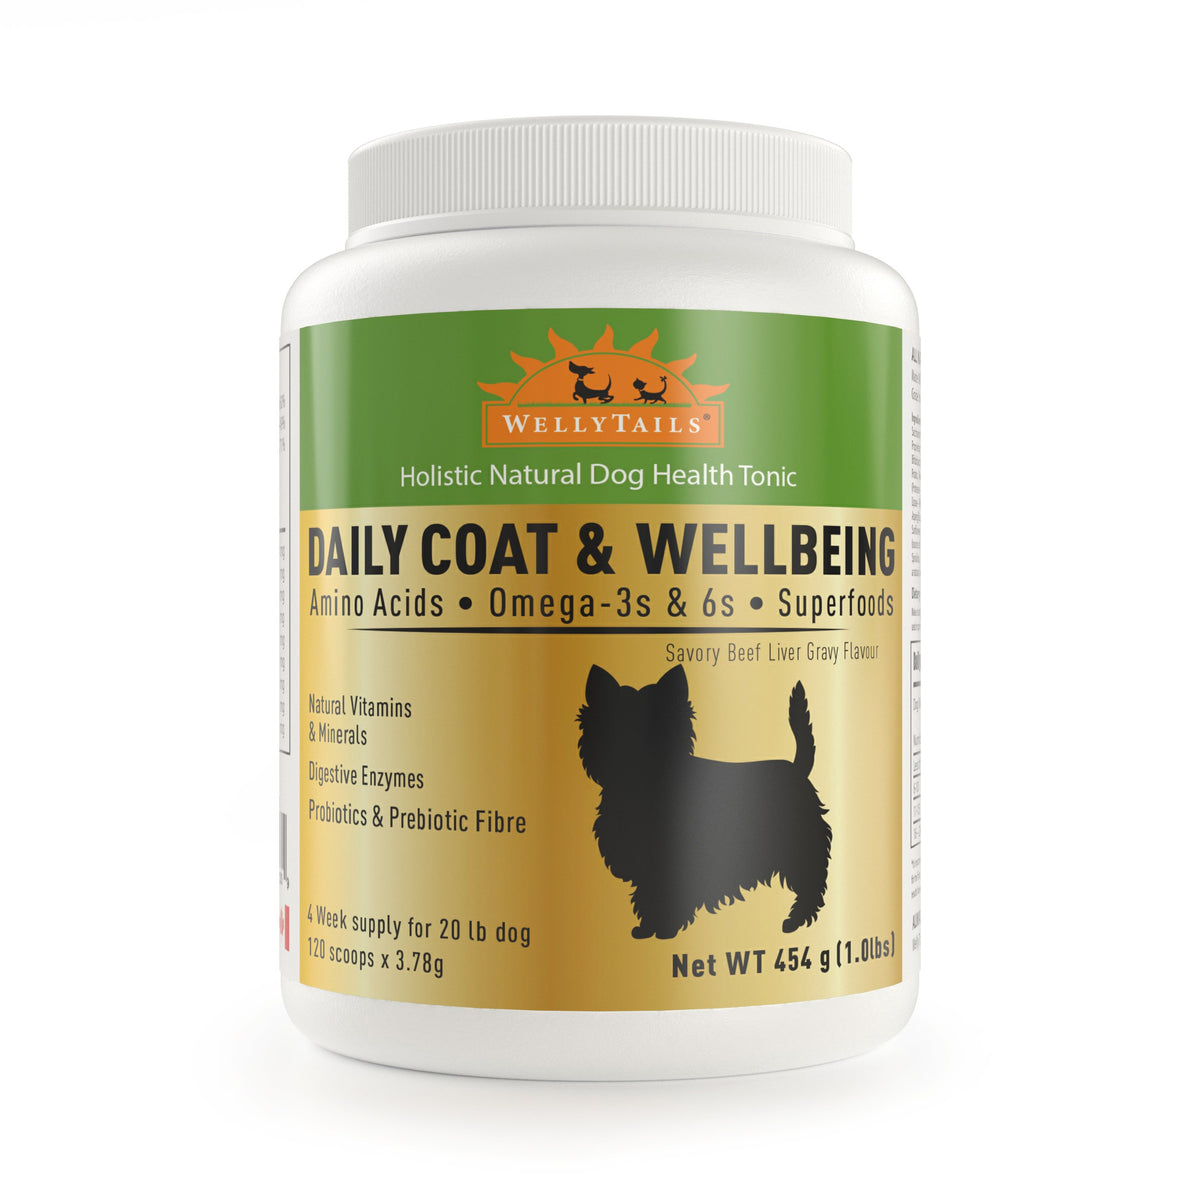 WellyTails® Daily Coat & Wellbeing - for small dogs